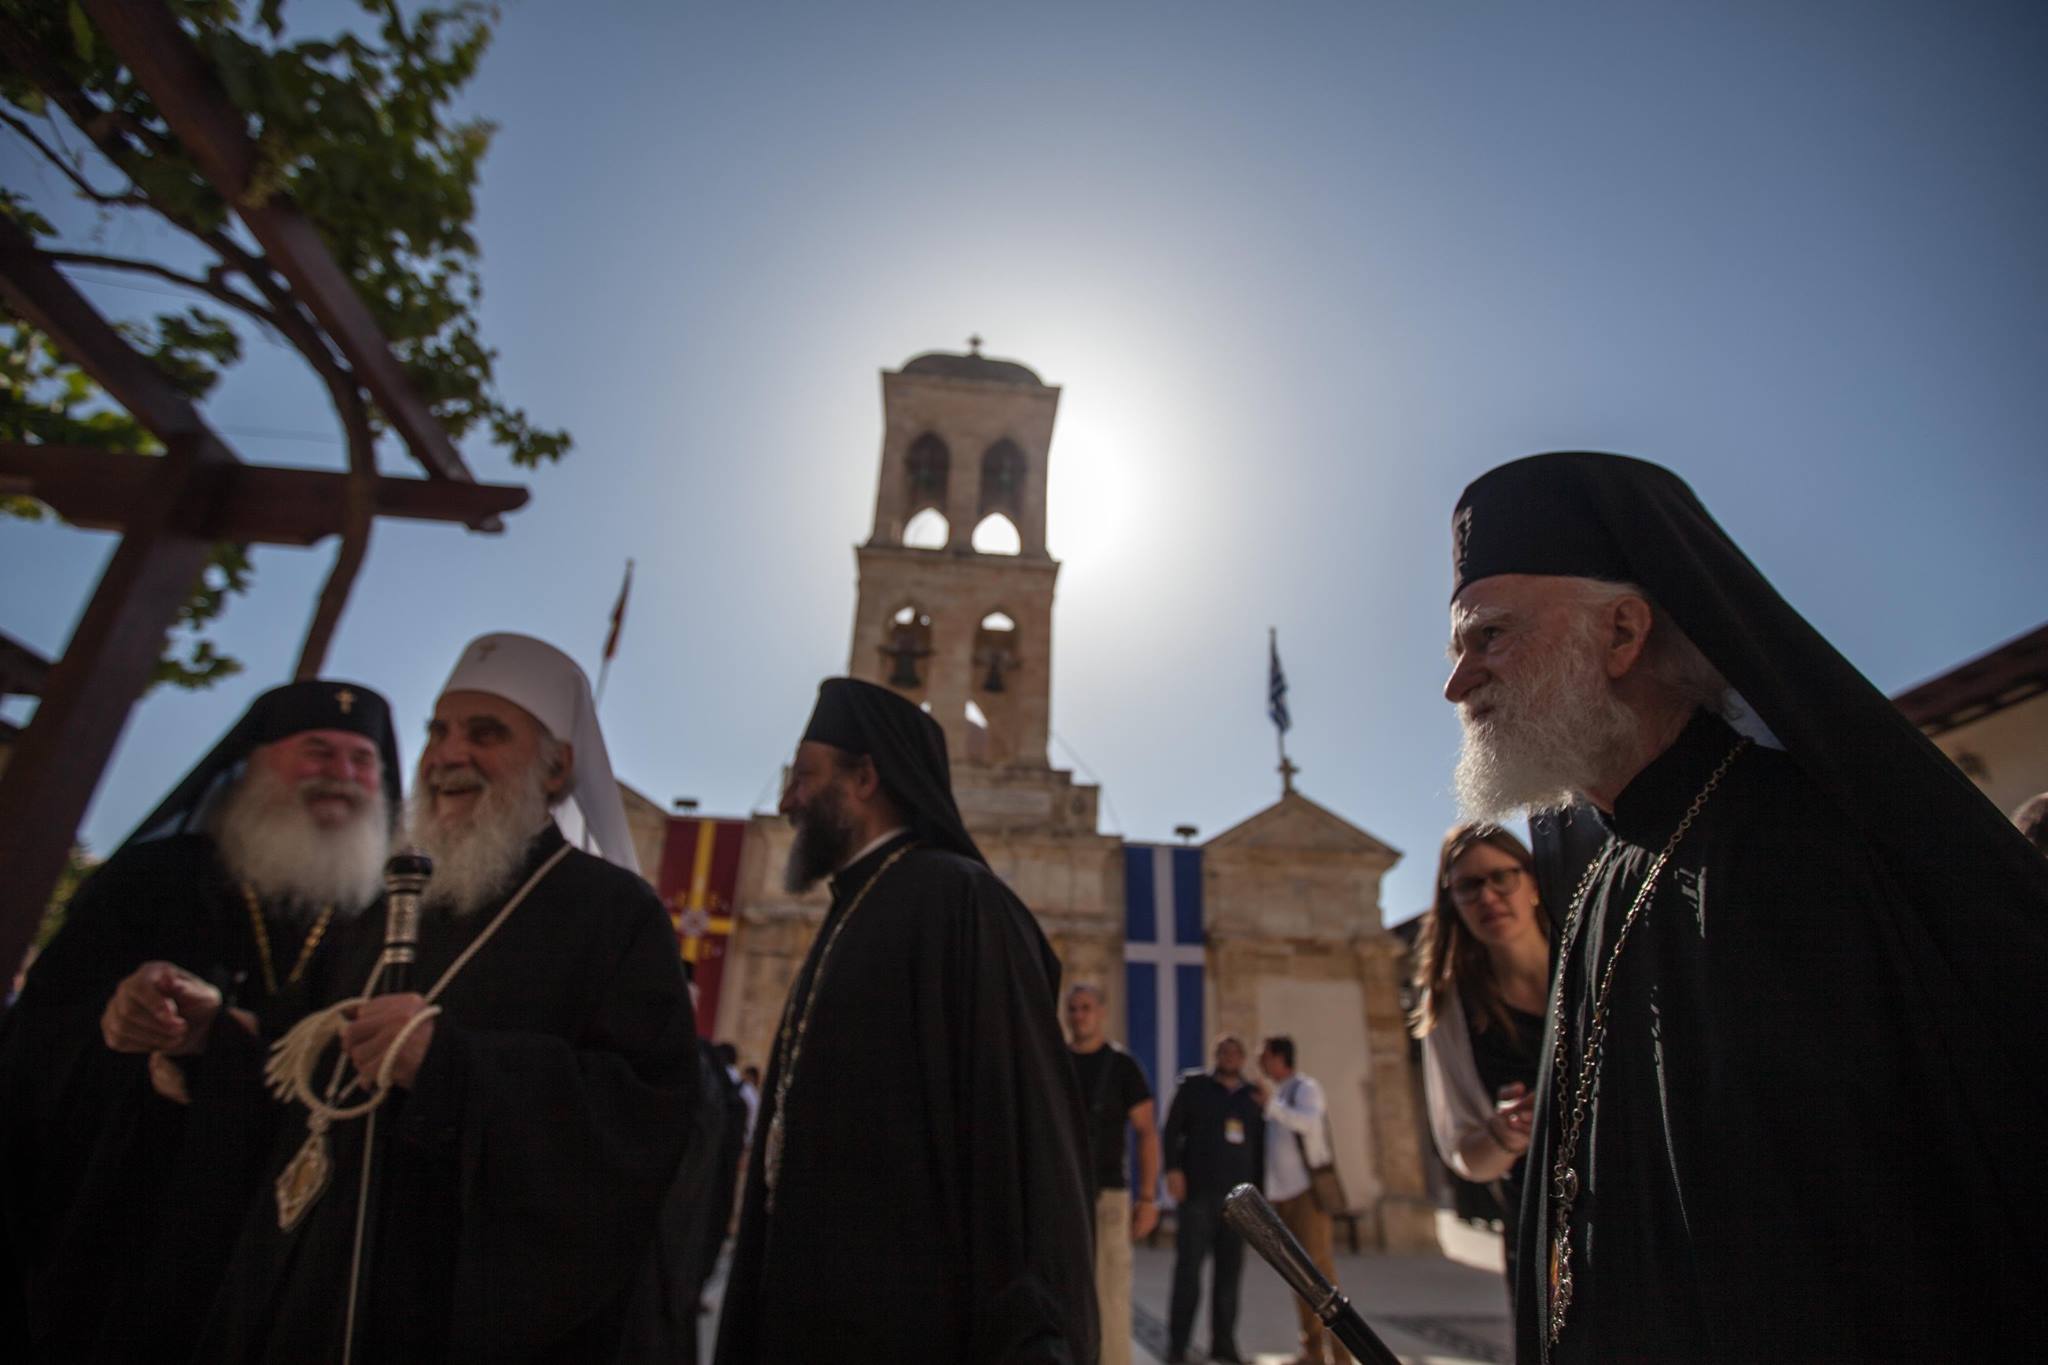 The Great Orthodox Council ended. Now what for Ukraine?